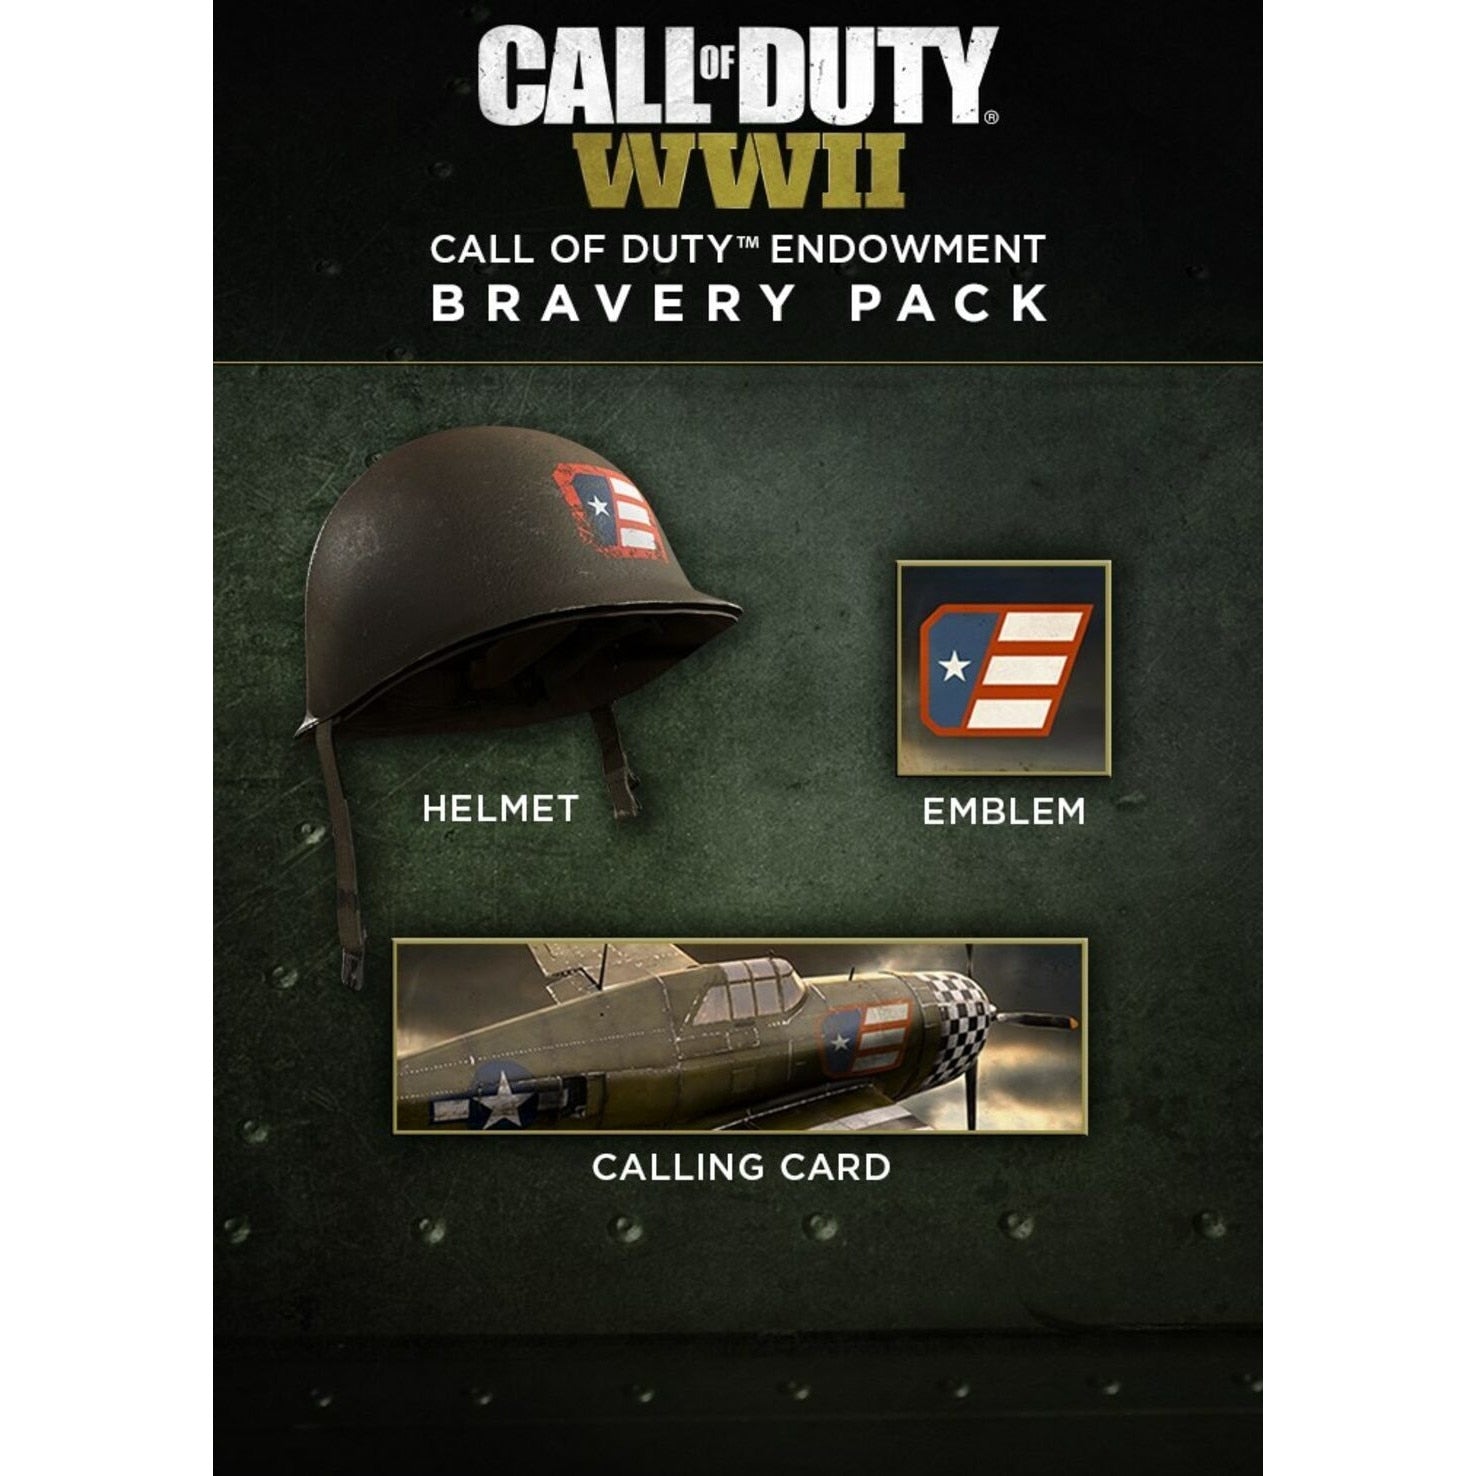 CALL OF DUTY: WWII - CALL OF DUTY ENDOWMENT BRAVERY PACK (DLC) - PC - STEAM - MULTILANGUAGE - WORLDWIDE